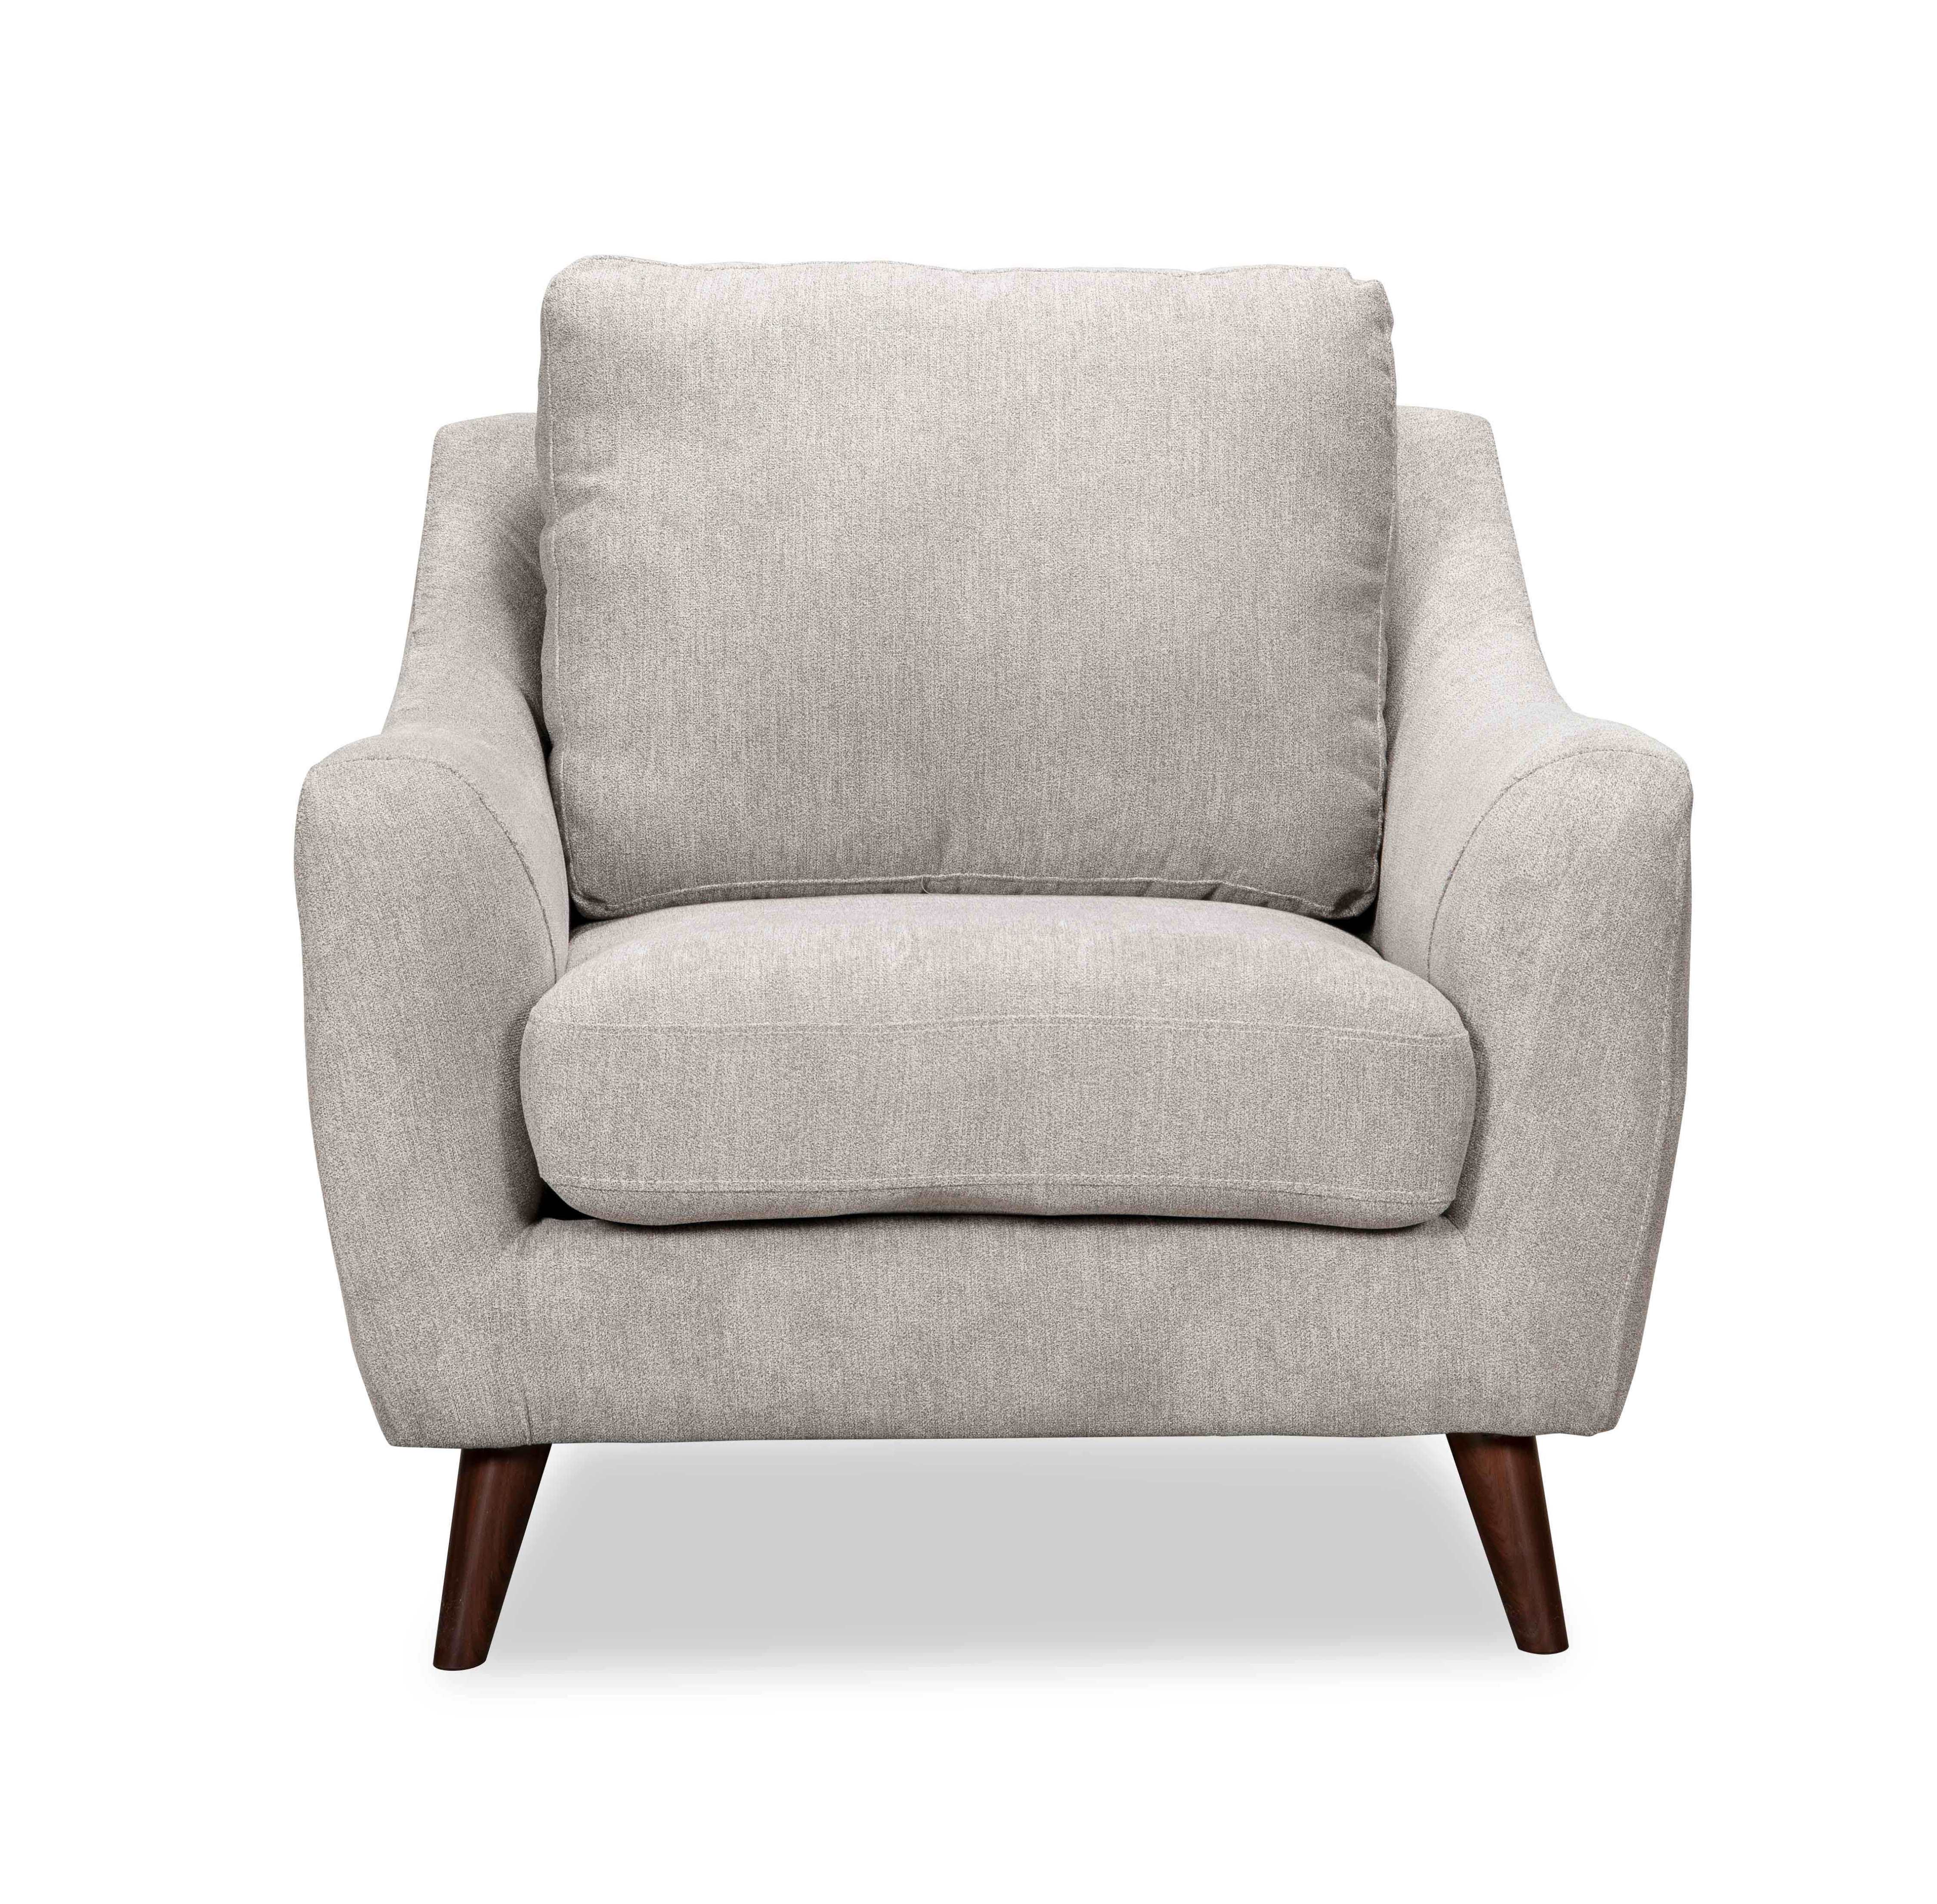 Kitchener seating collection Light Beige 9040